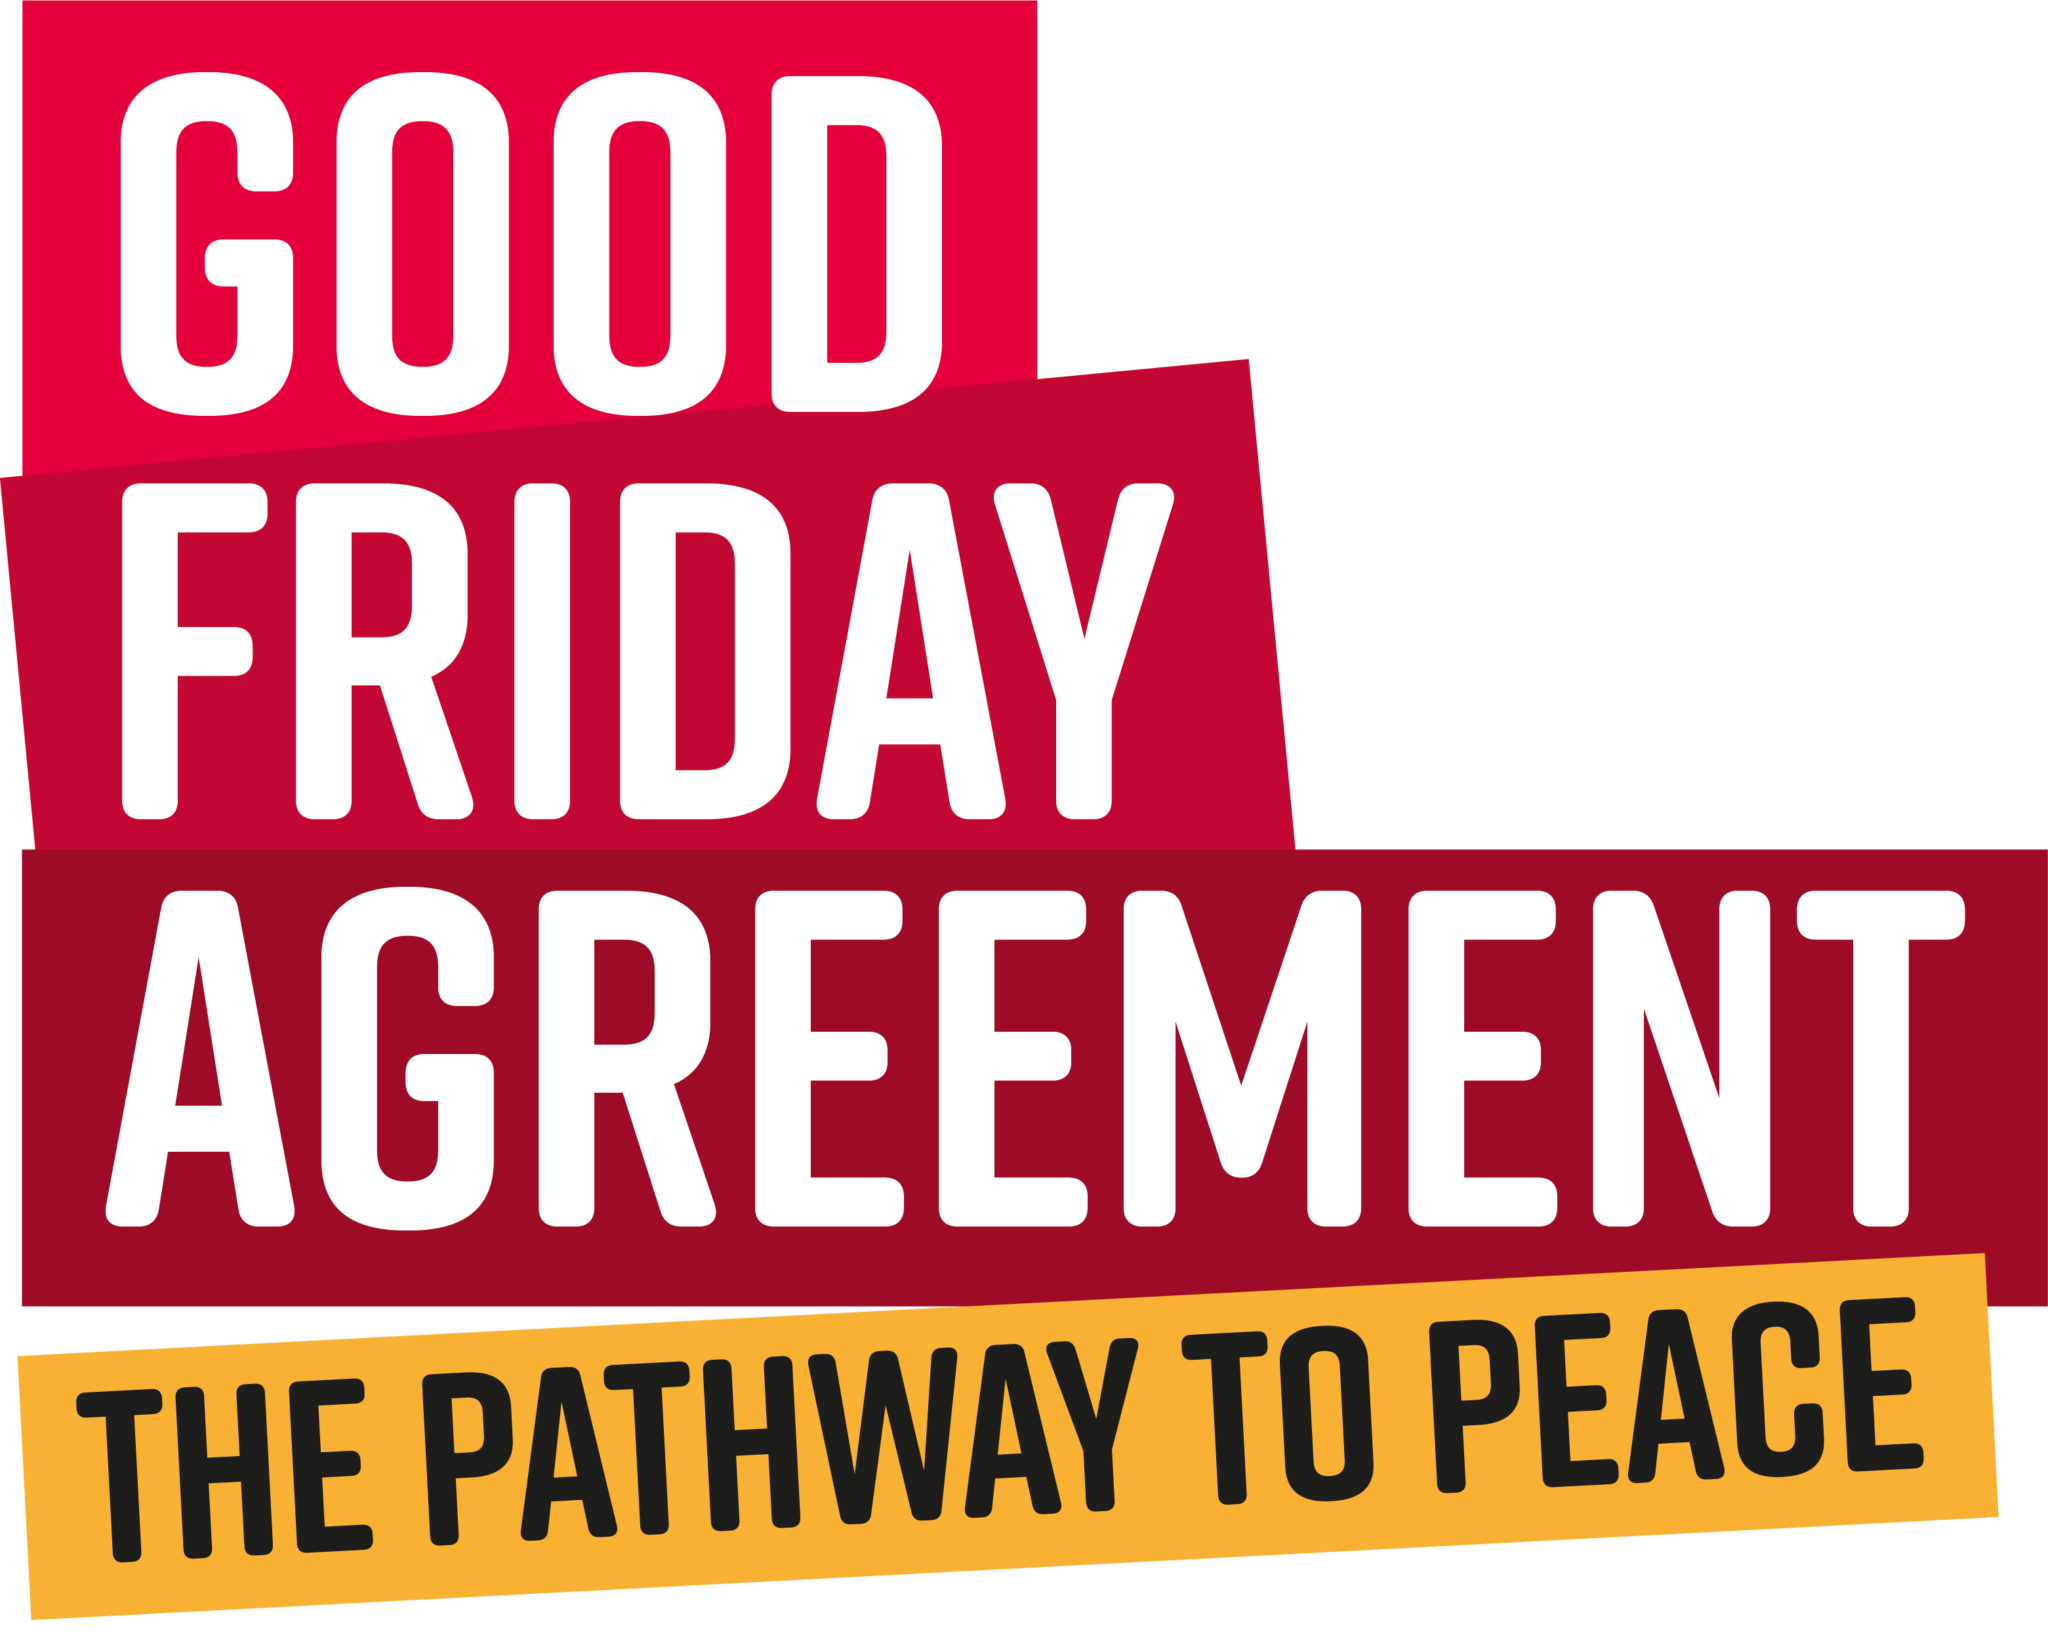 Good Friday Agreement The path to peace The Labour Party